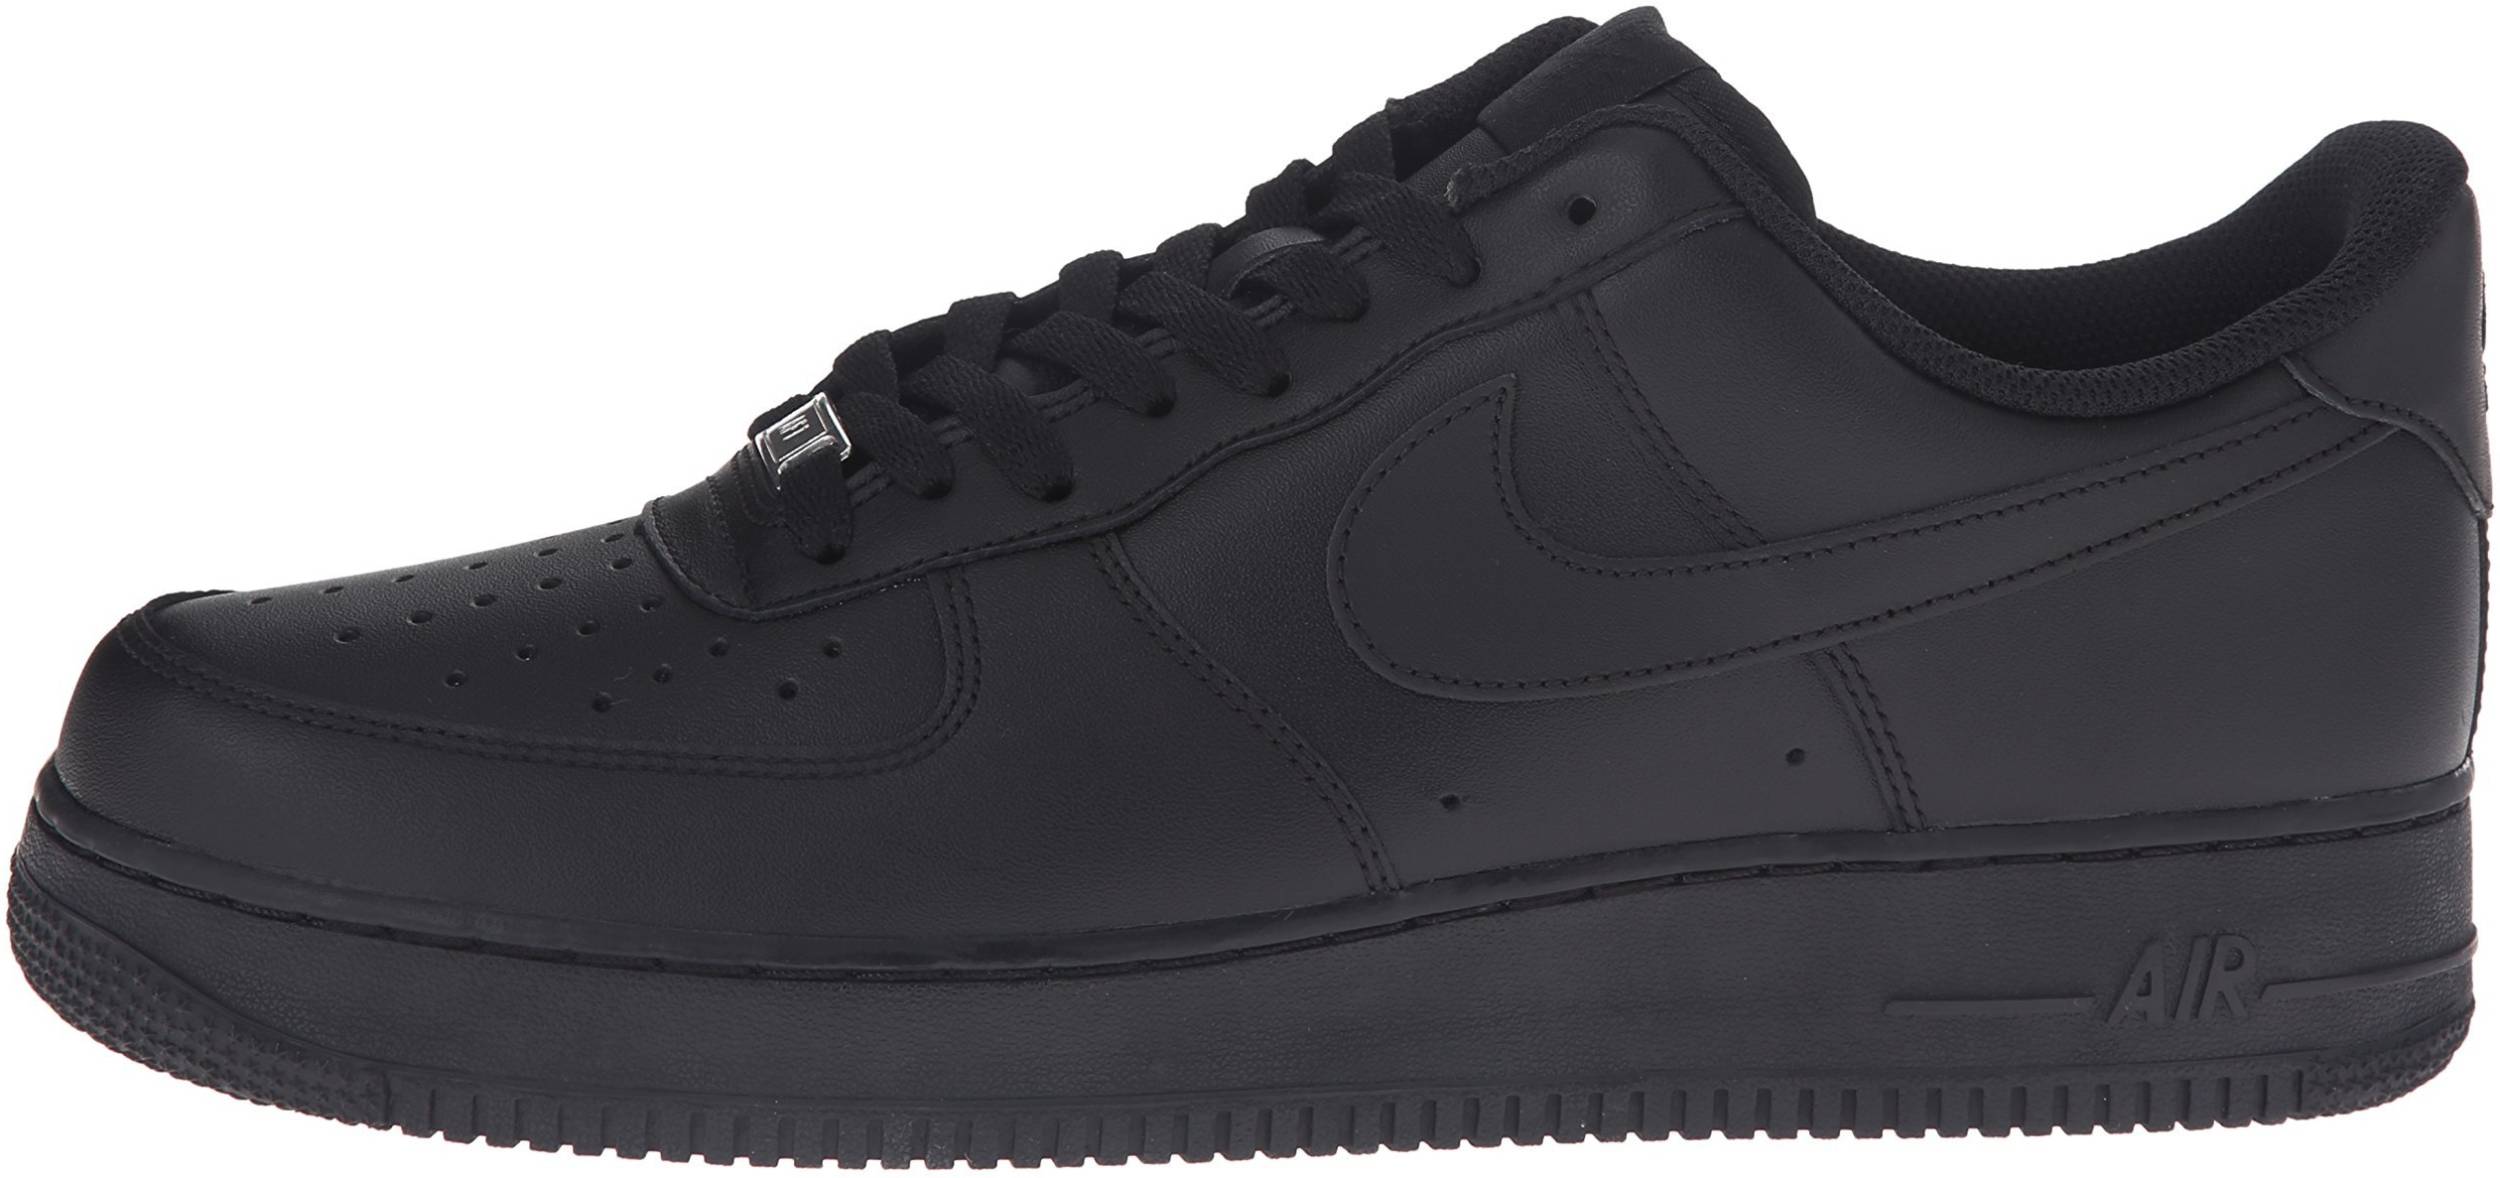 Save 11% on Nike Air Force 1 Sneakers 